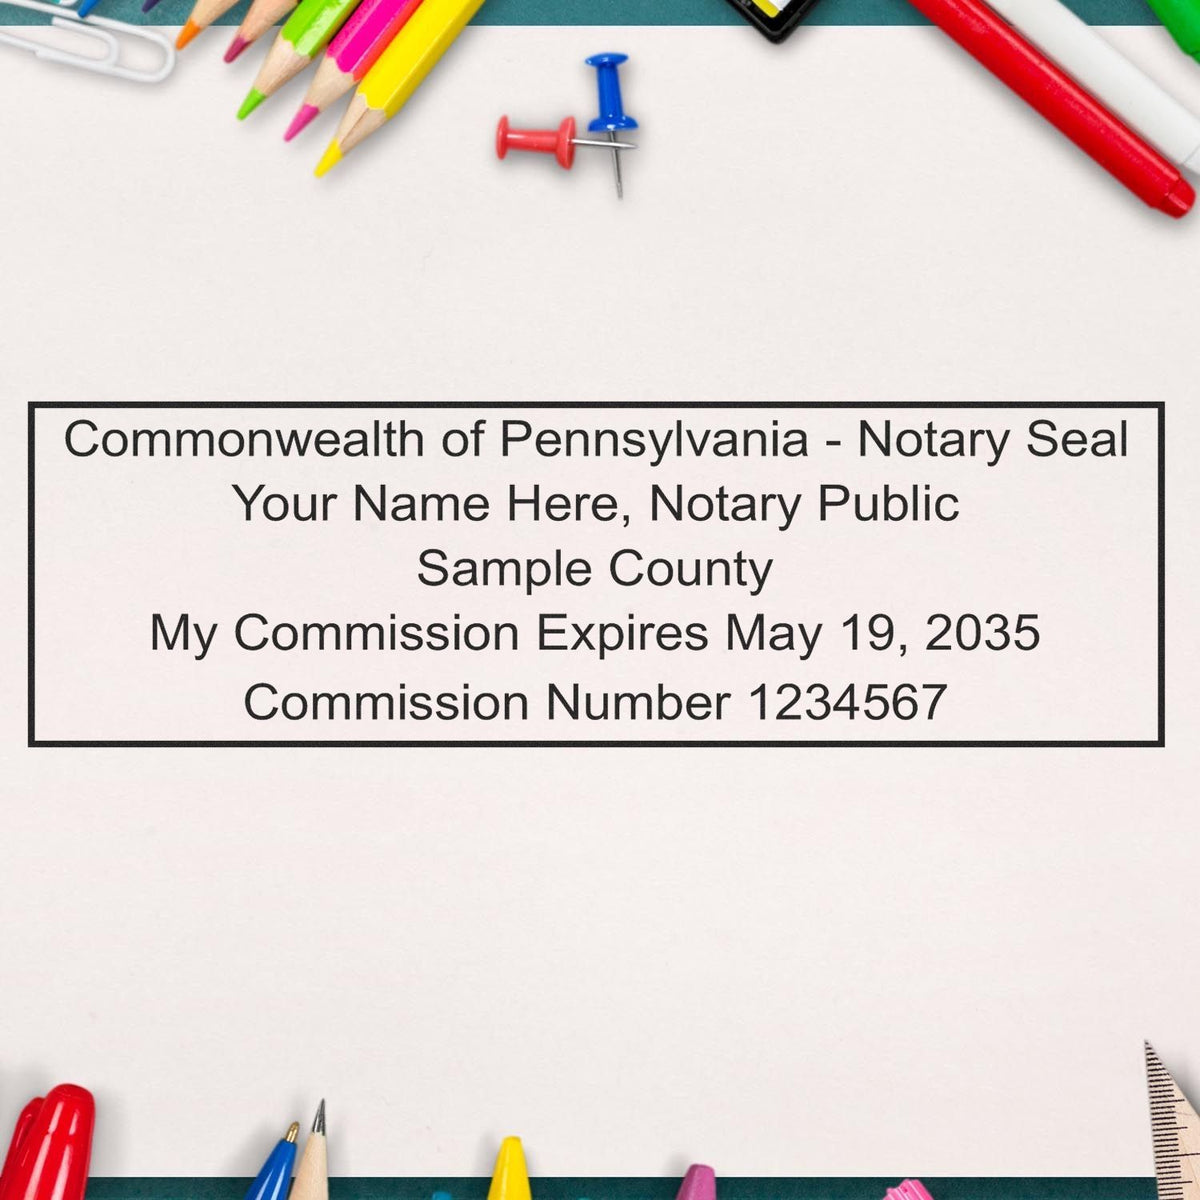 A photograph of the Wooden Handle Pennsylvania Rectangular Notary Public Stamp stamp impression reveals a vivid, professional image of the on paper.